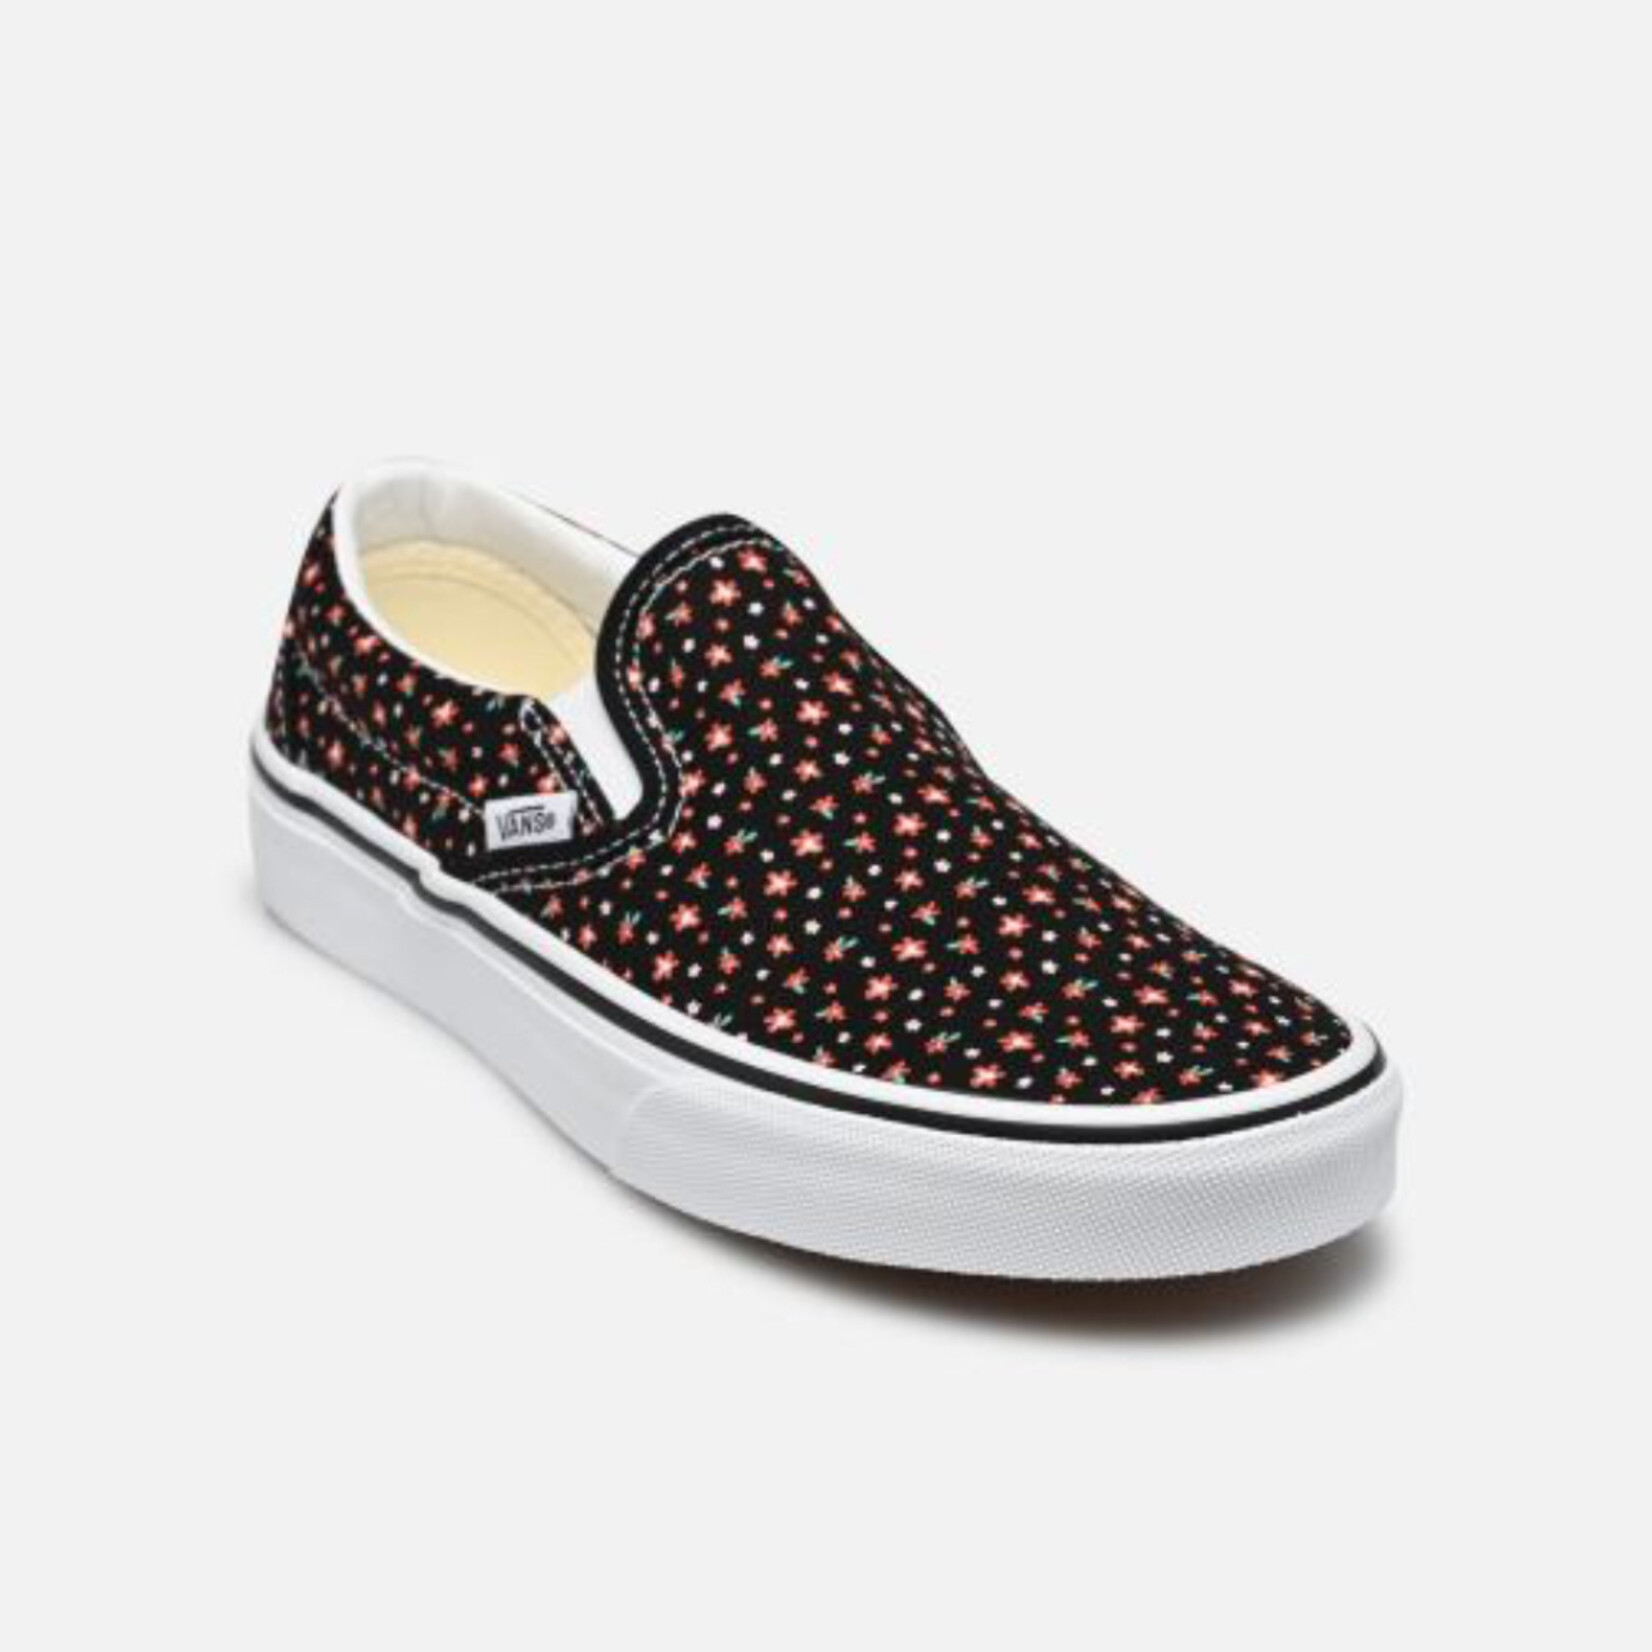 Vans Classic Slip-On Ditsy Floral